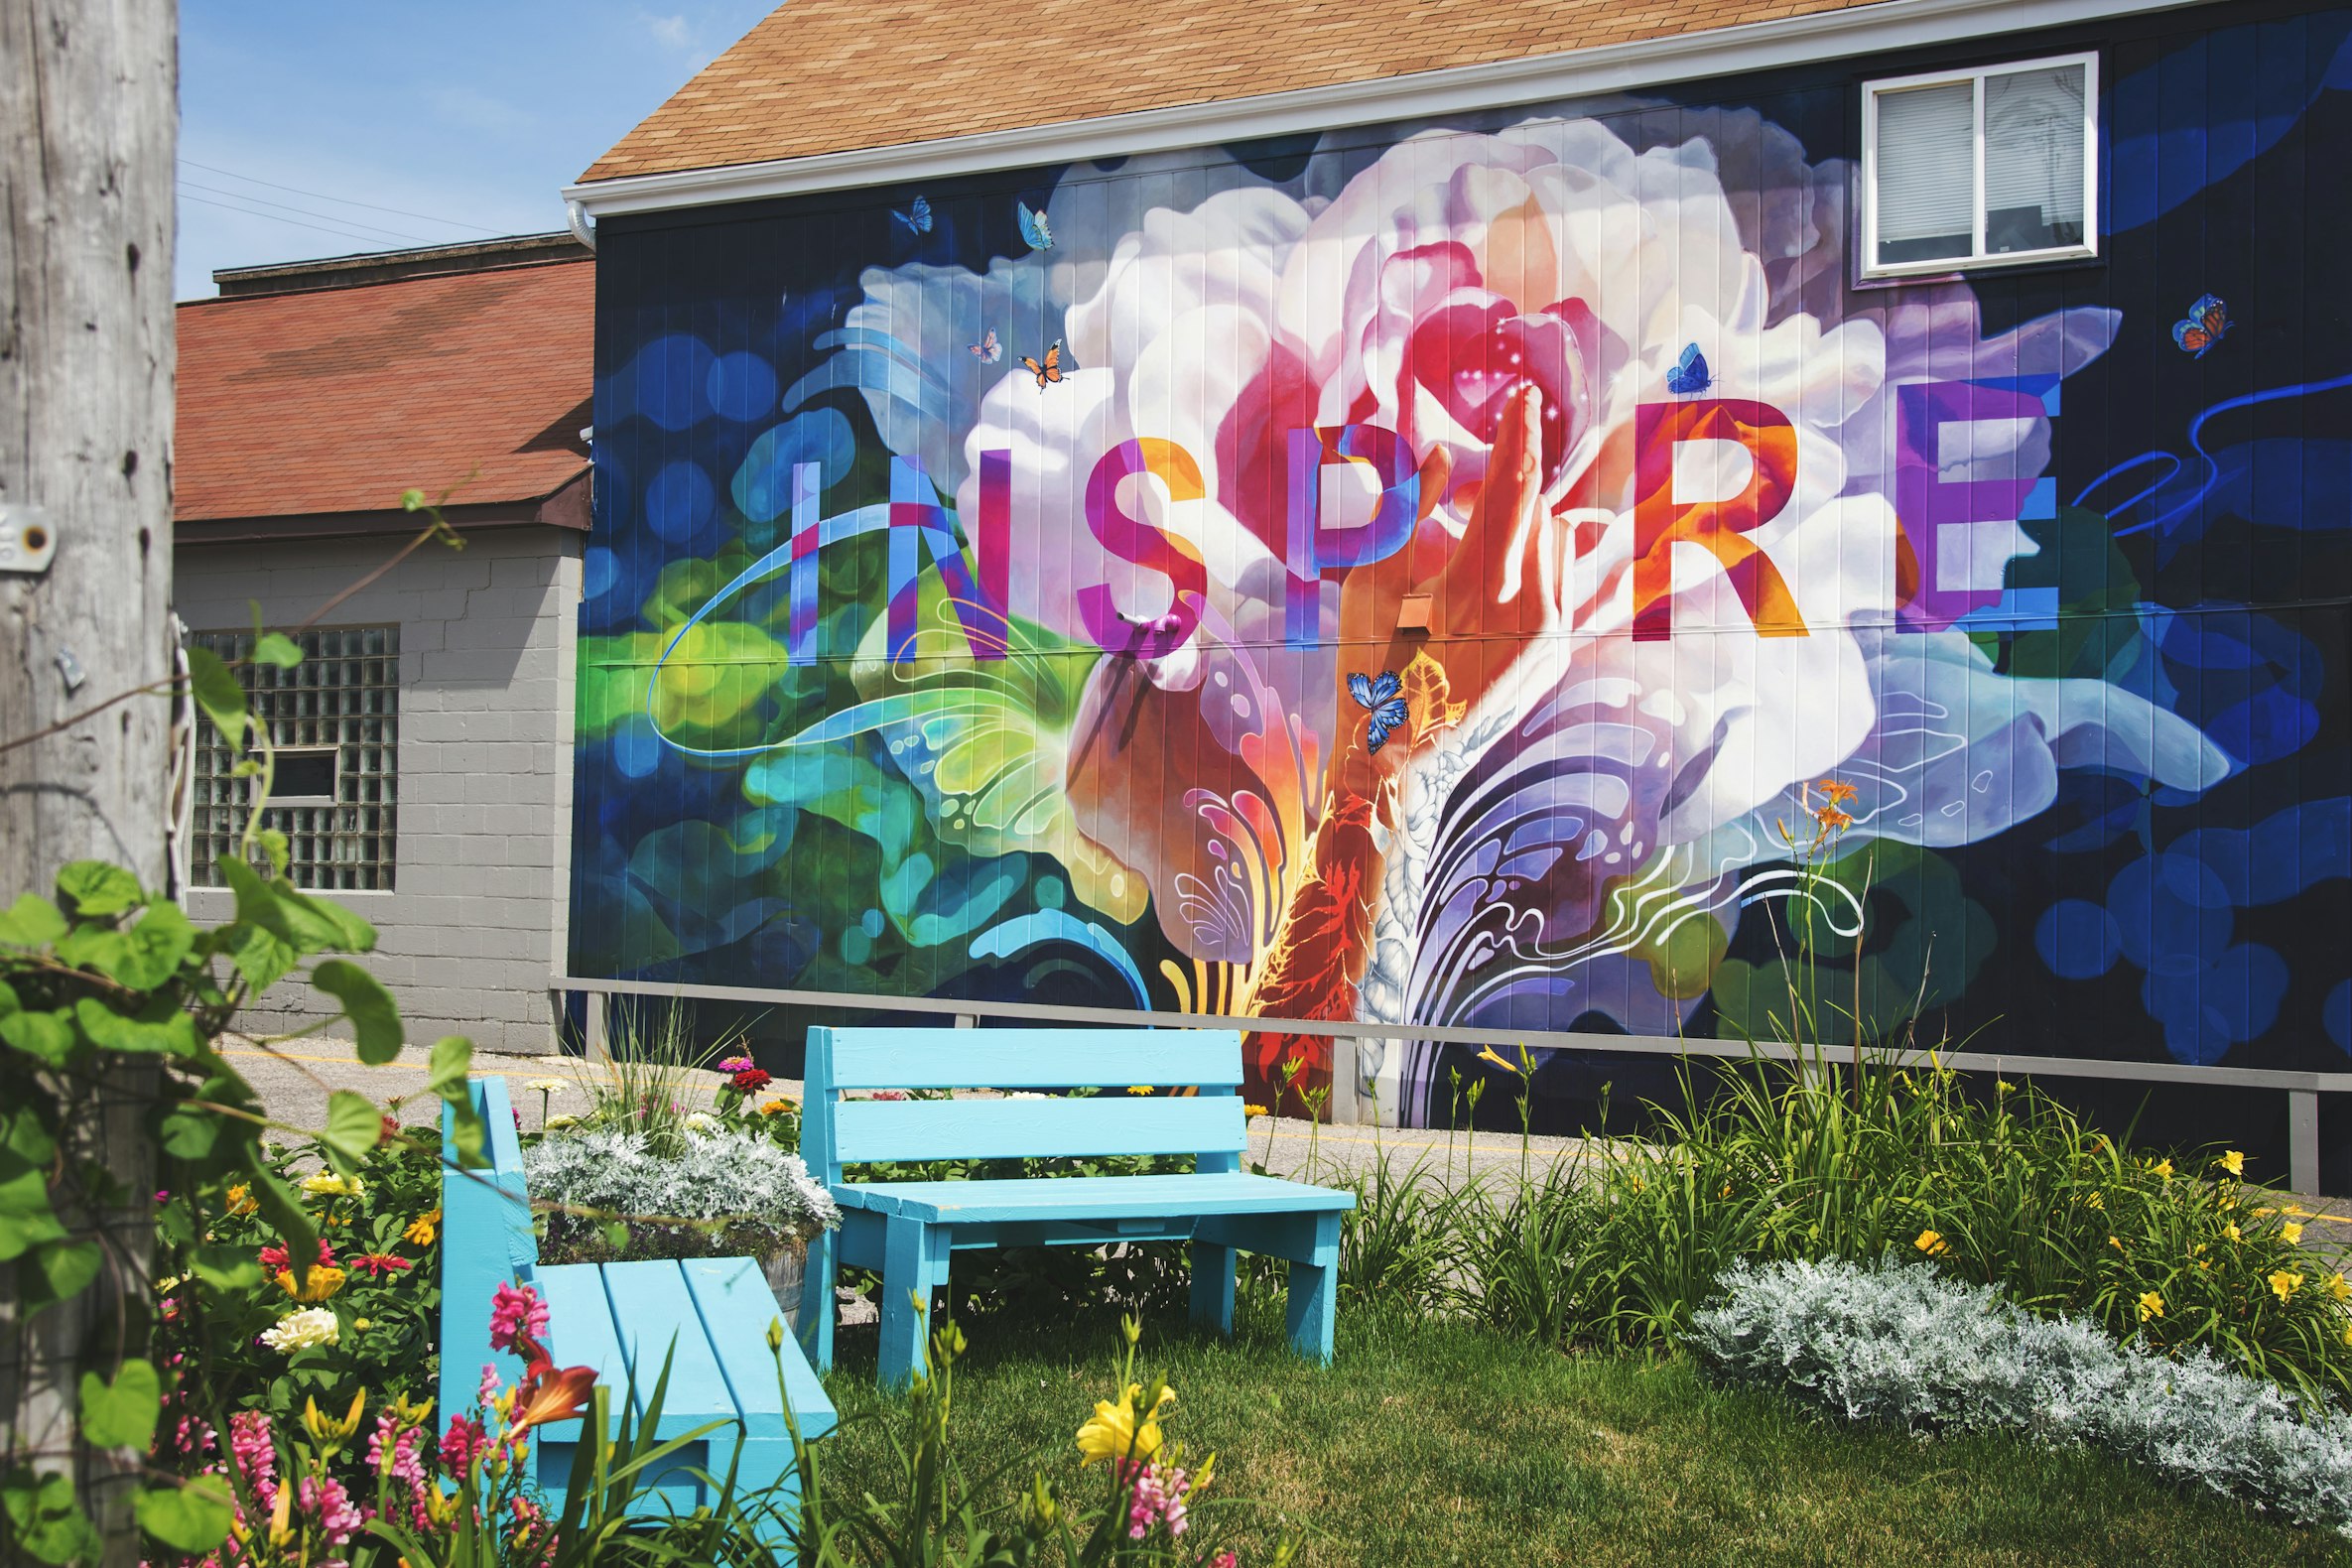 Mural of the word Inspire with colorful hexagonal shapes, photographed by Gary Meulemans